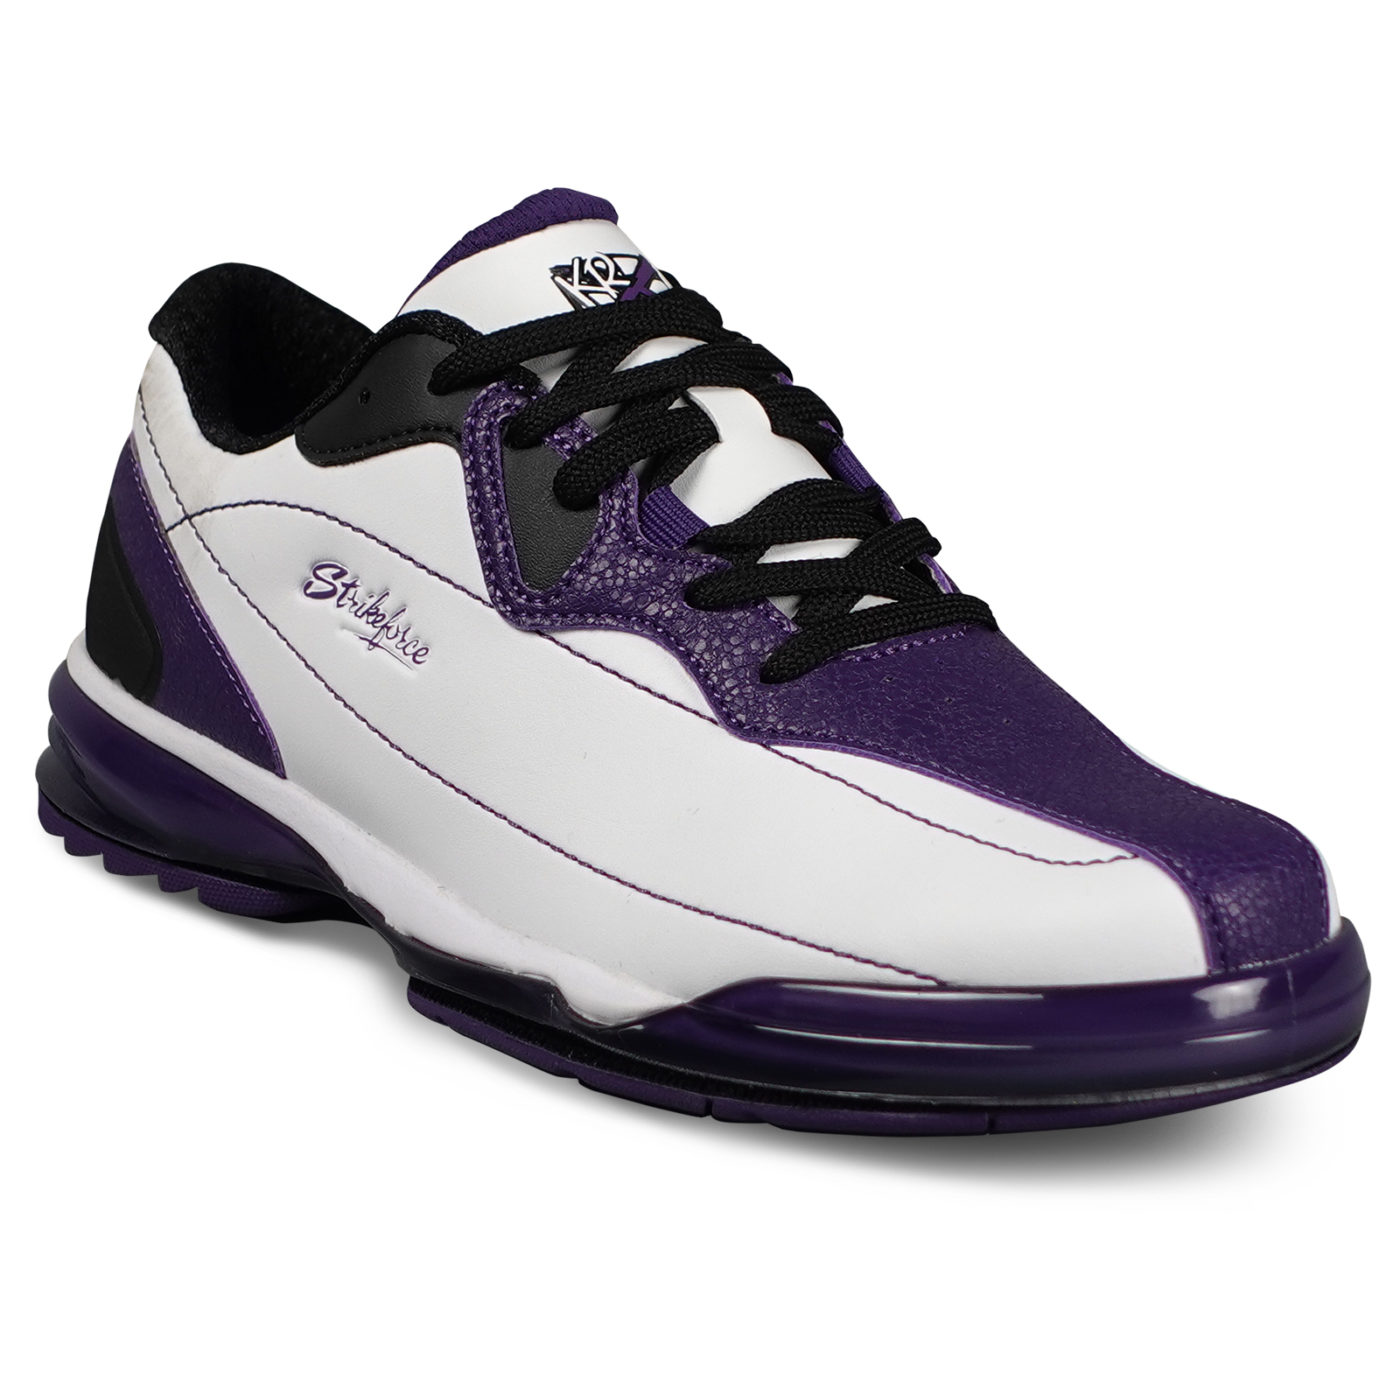 KR Strikeforce Dream White Purple Women's Right Hand Bowling Shoes Questions & Answers